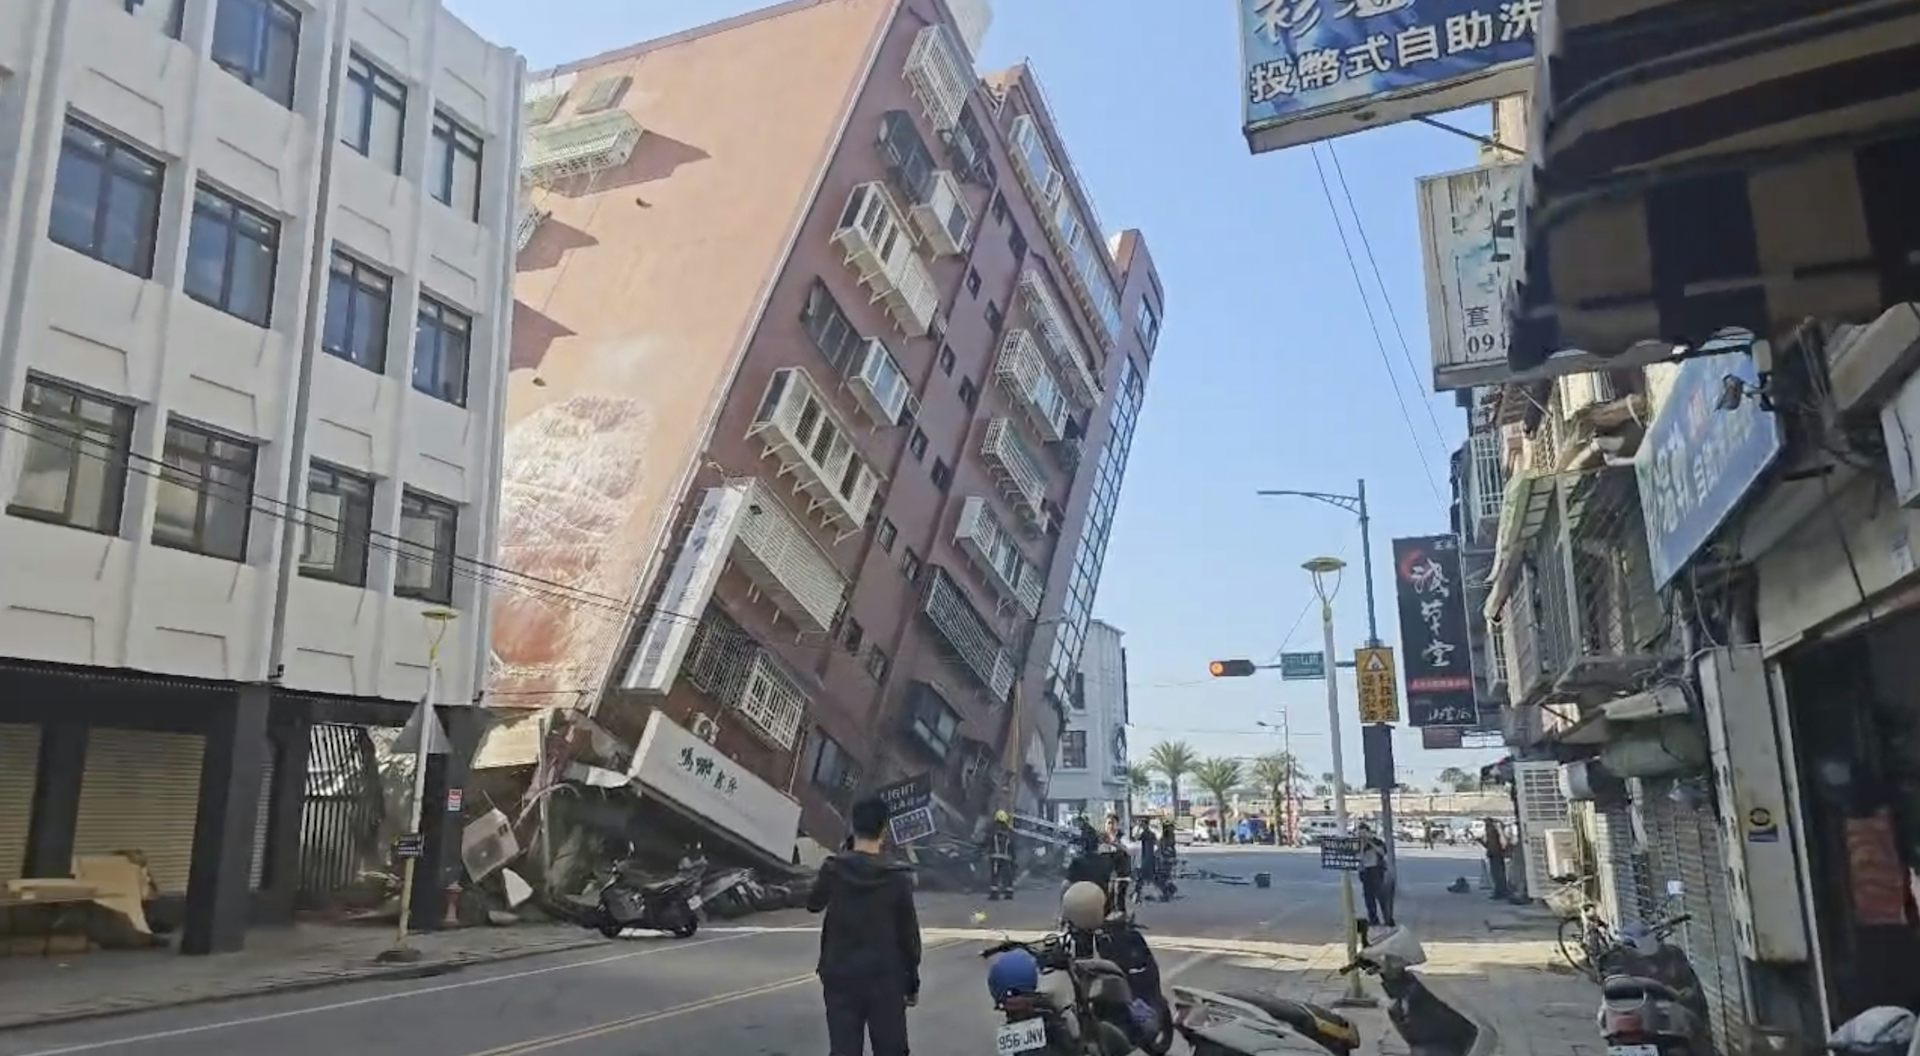 Insights from an Earthquake Scientist: Current Understanding and Future Possibilities of the Taiwan Earthquake